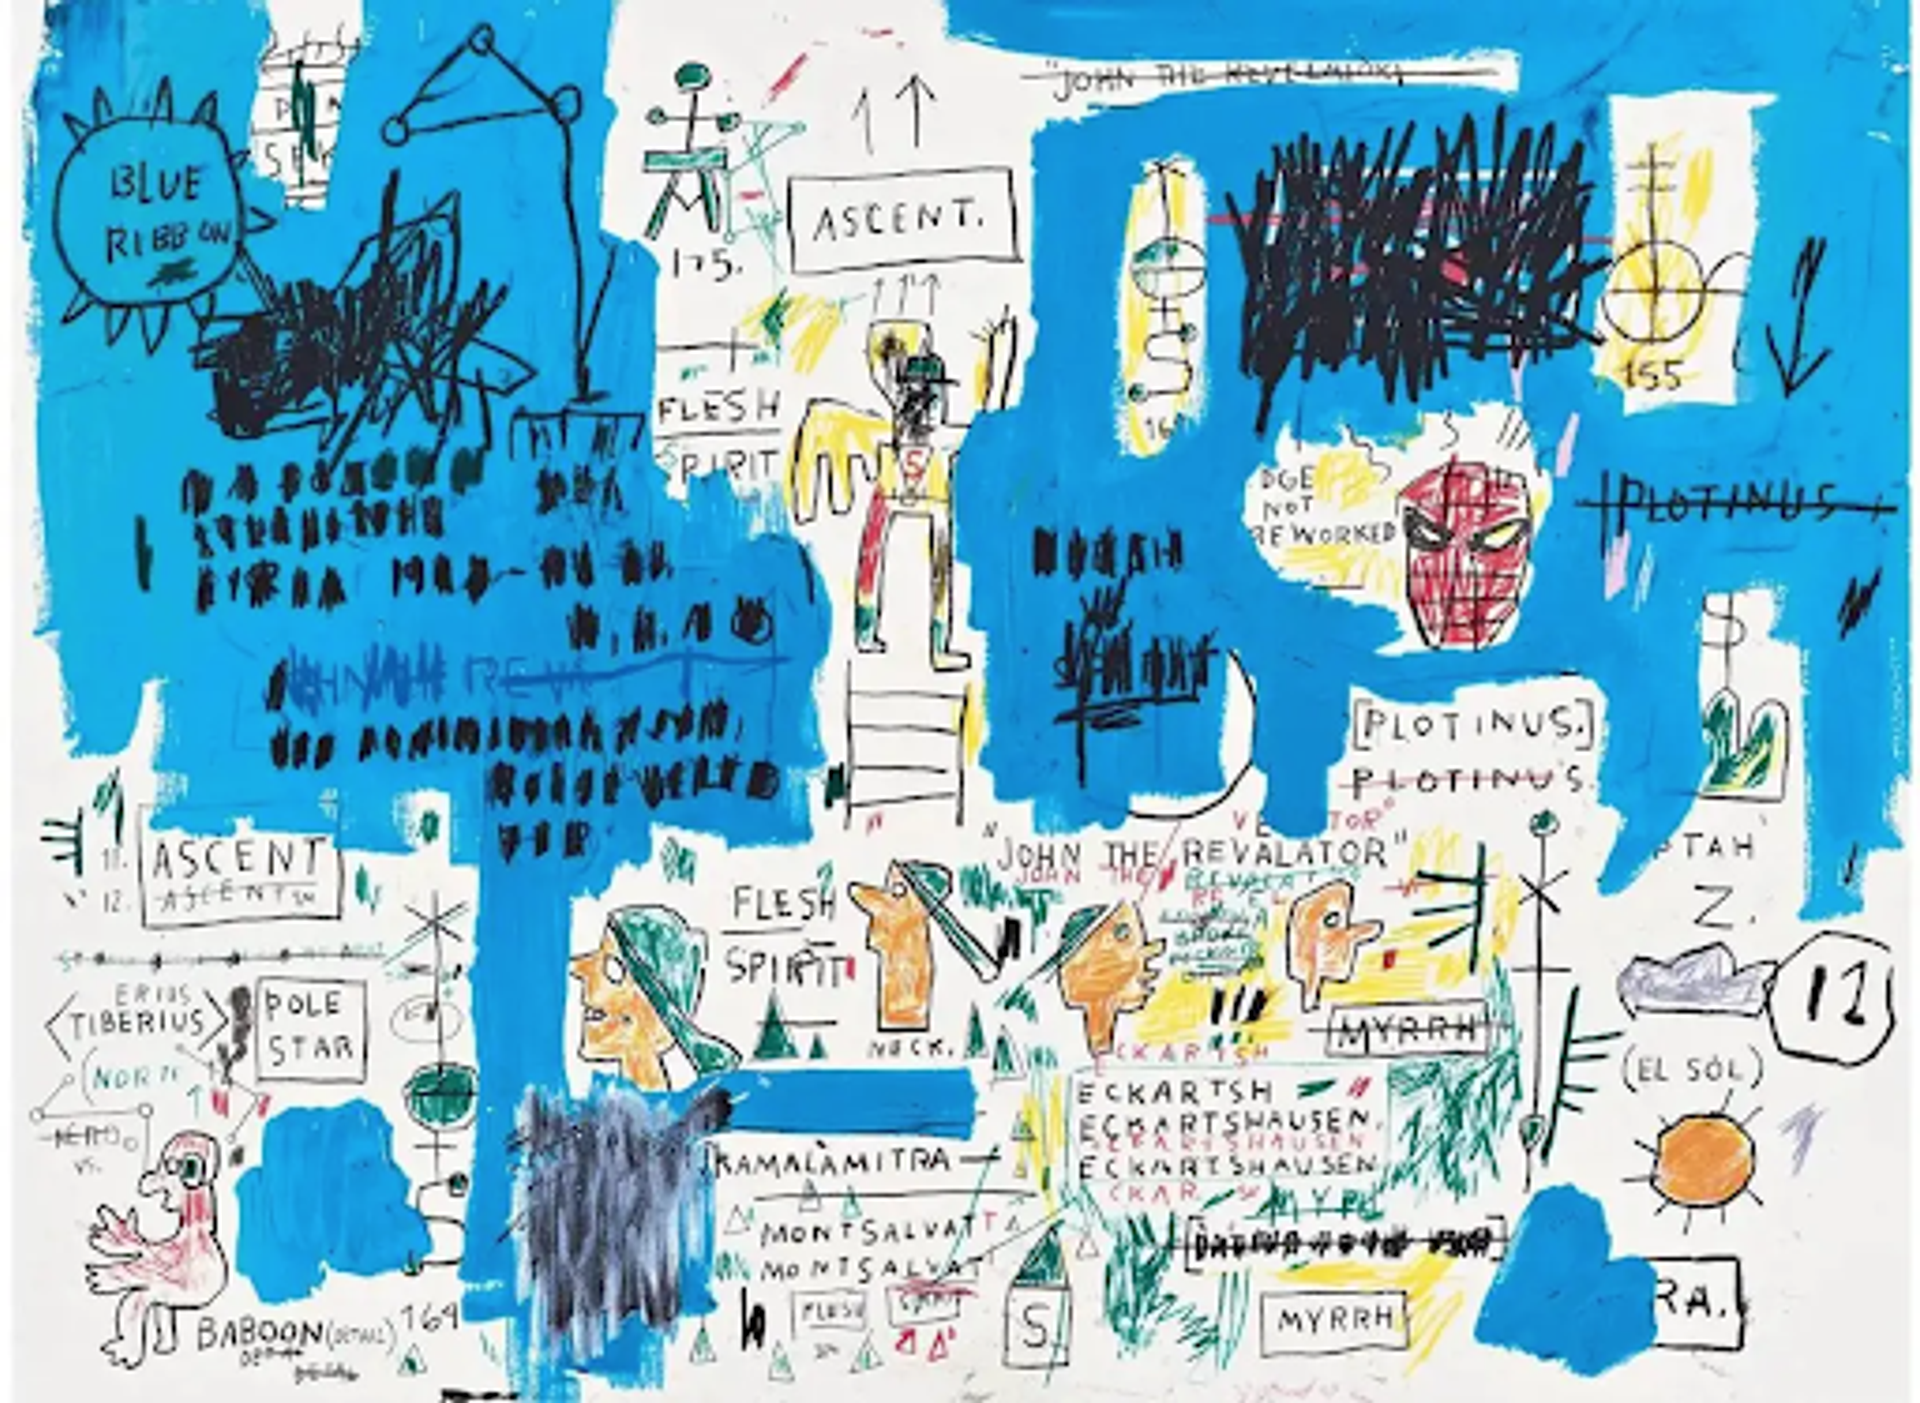 Jean-Michel Basquiat’s Ascent. A Neo Expressionist screenprint of abstract symbols and religious figures and texts across a white and blue background.